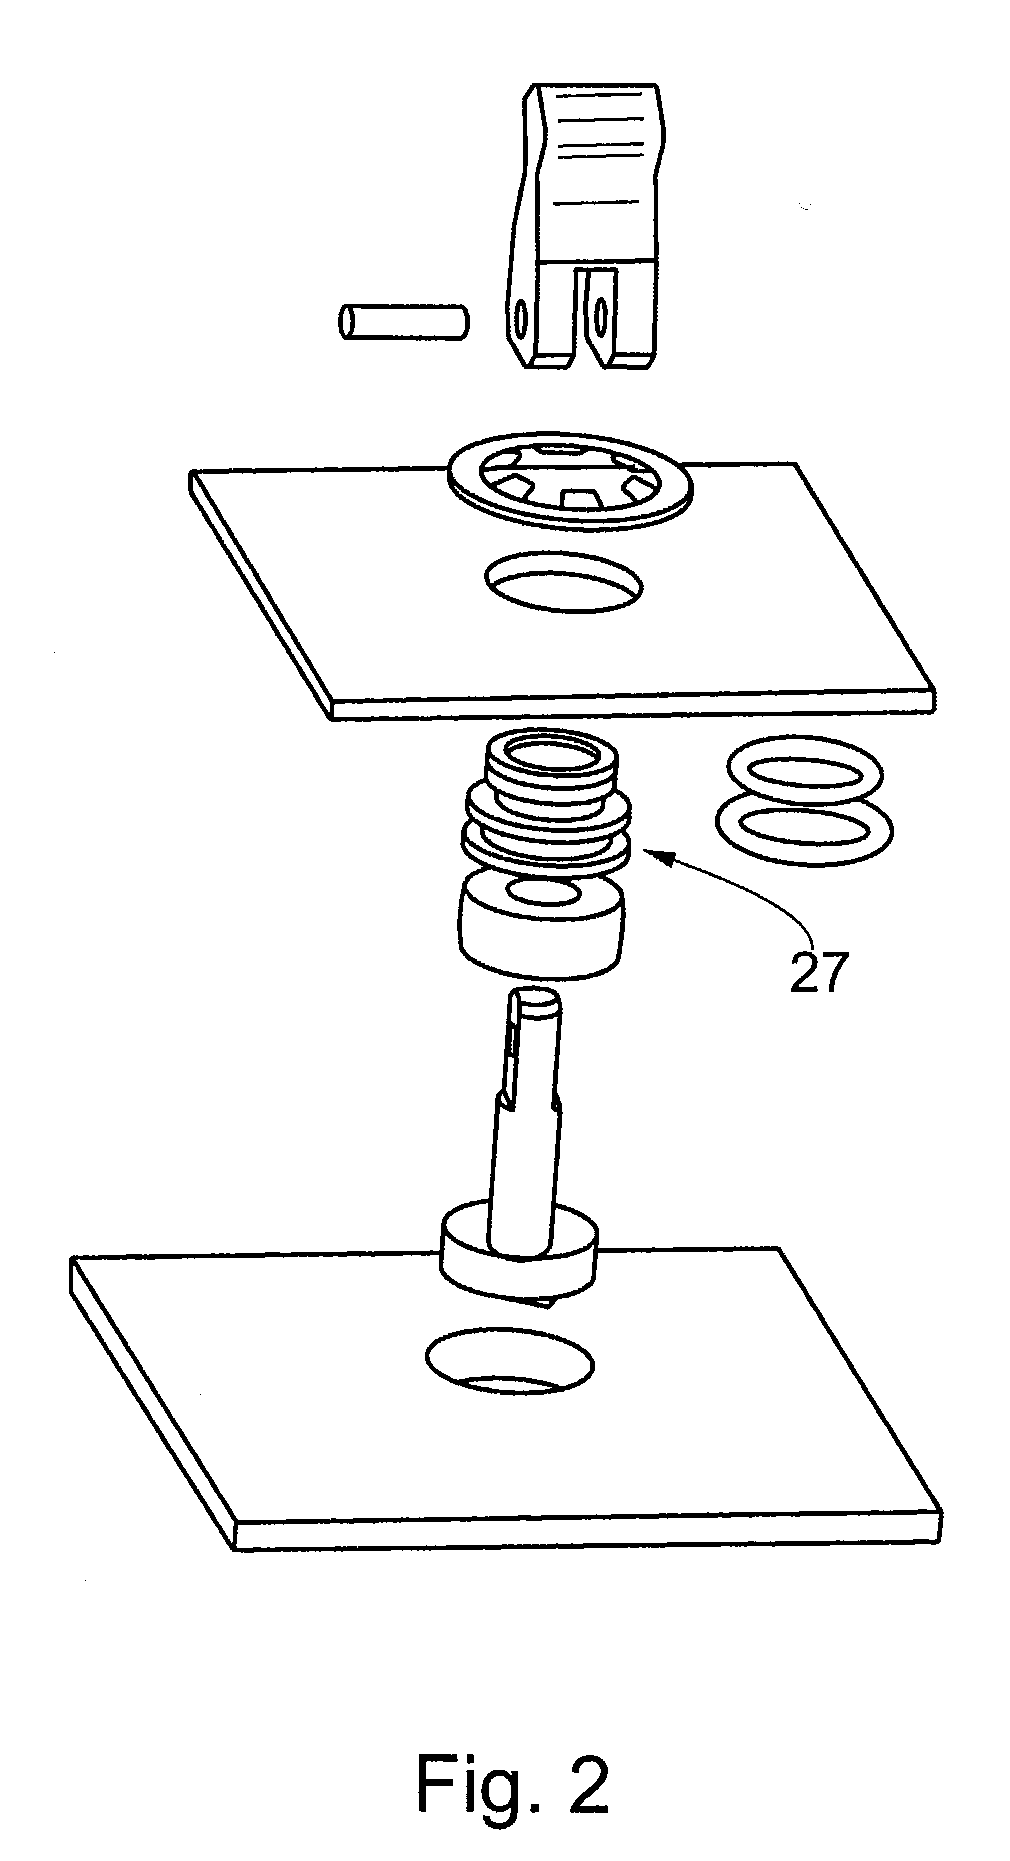 Plug and method for fixing at least two devices